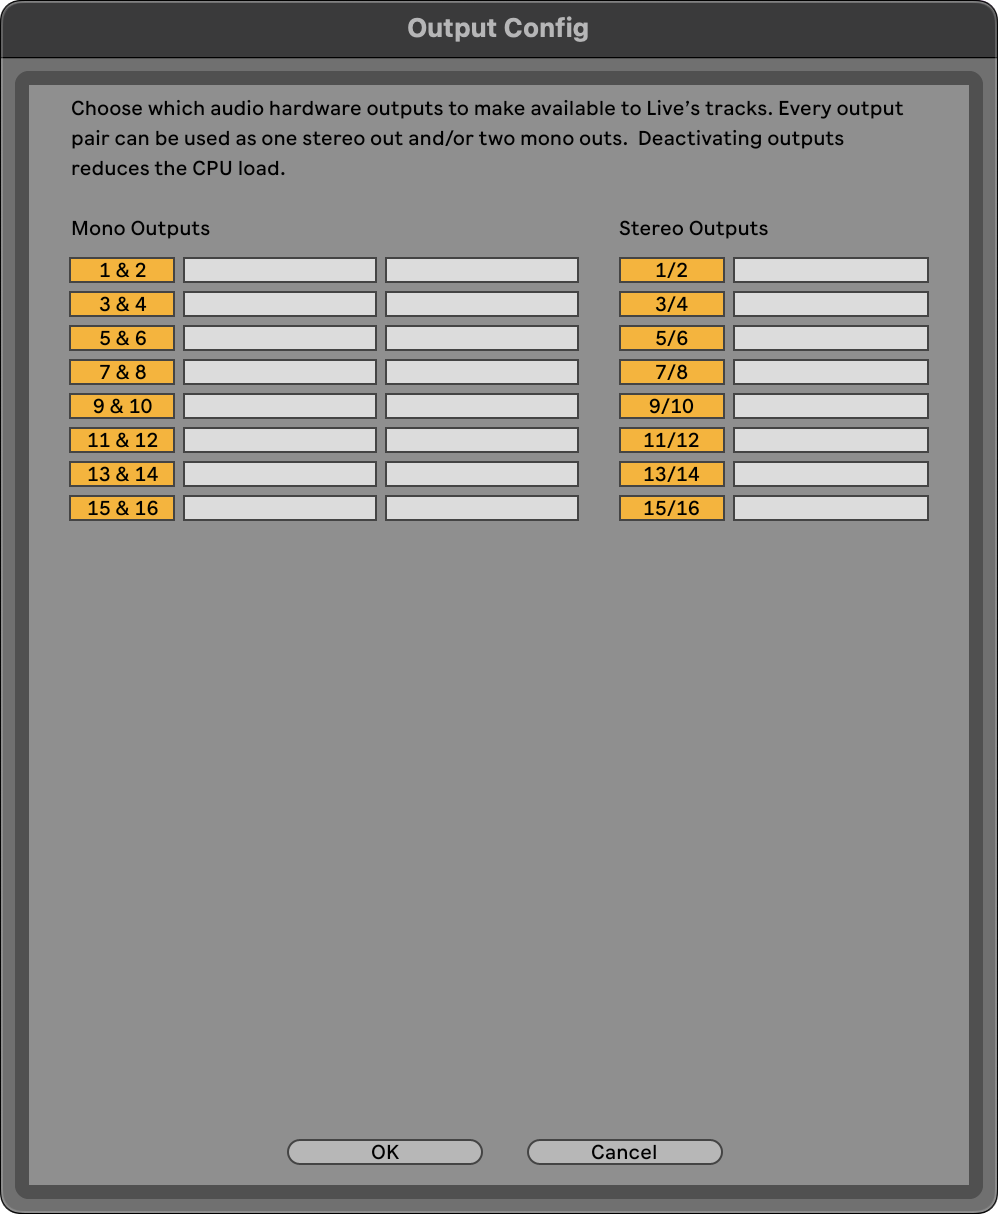 A screenshot of the Output Config window